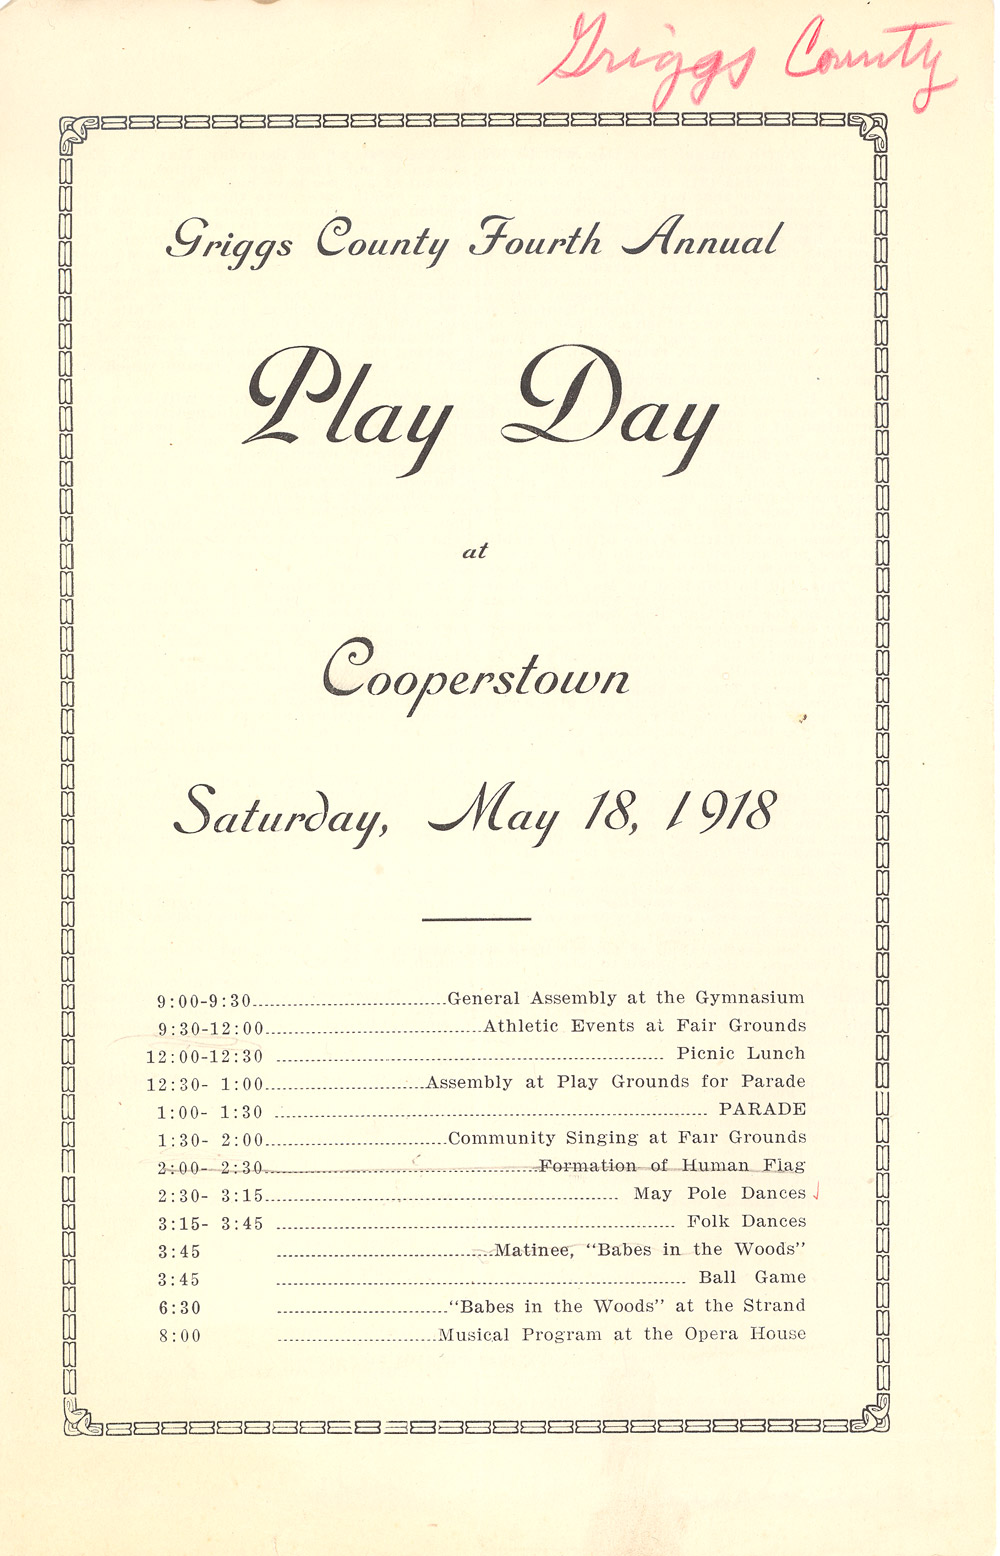 Play Days were popular end-of-the-school year events. Parents often attended Play Day events which were all about having fun. The State Superintendent of Public Instruction did not offer any booklets for Play Day. The events were organized by each school district.